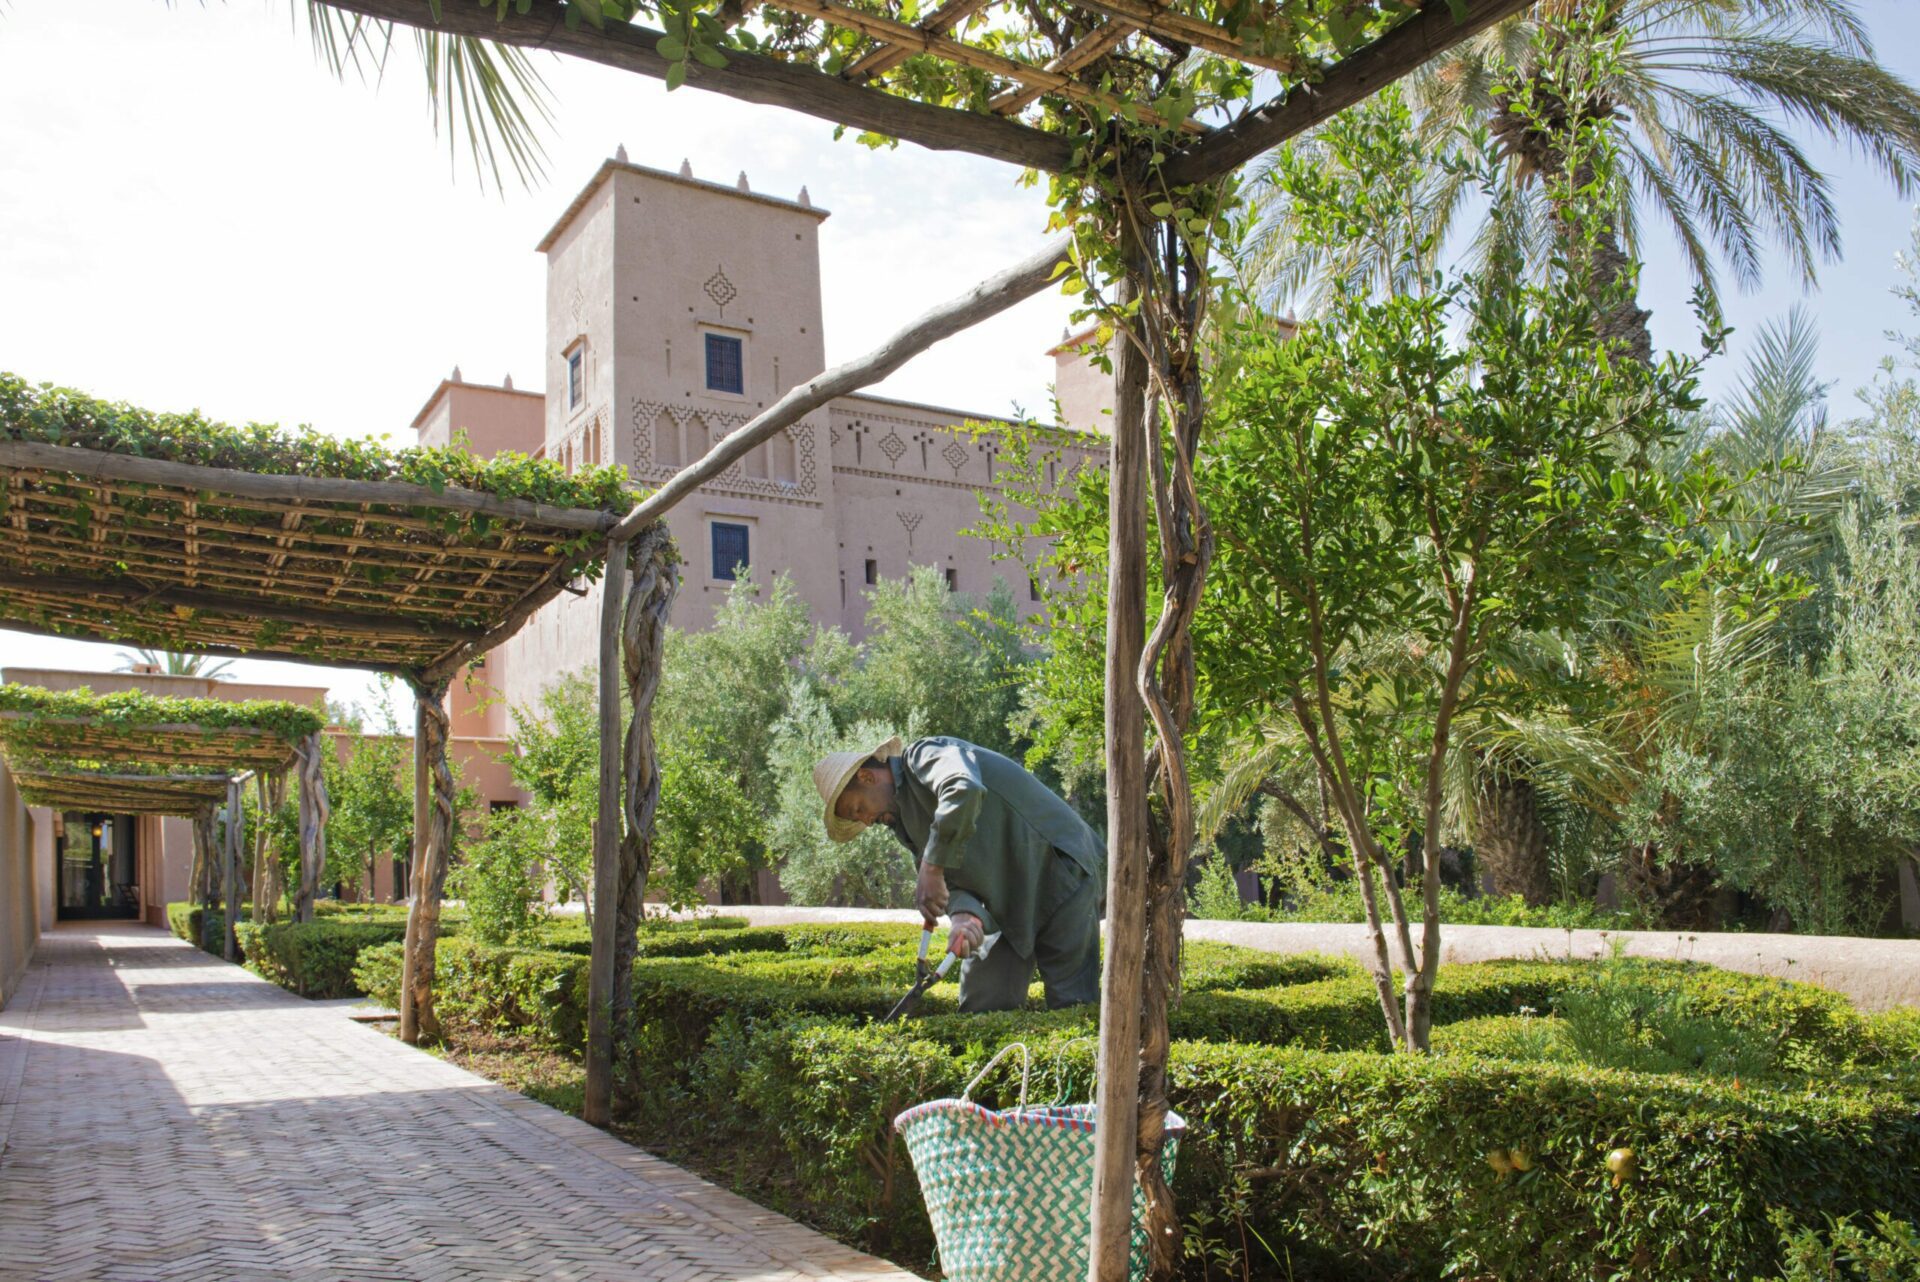 Things to do in Morocco tour the gardens at Dar Ahlam